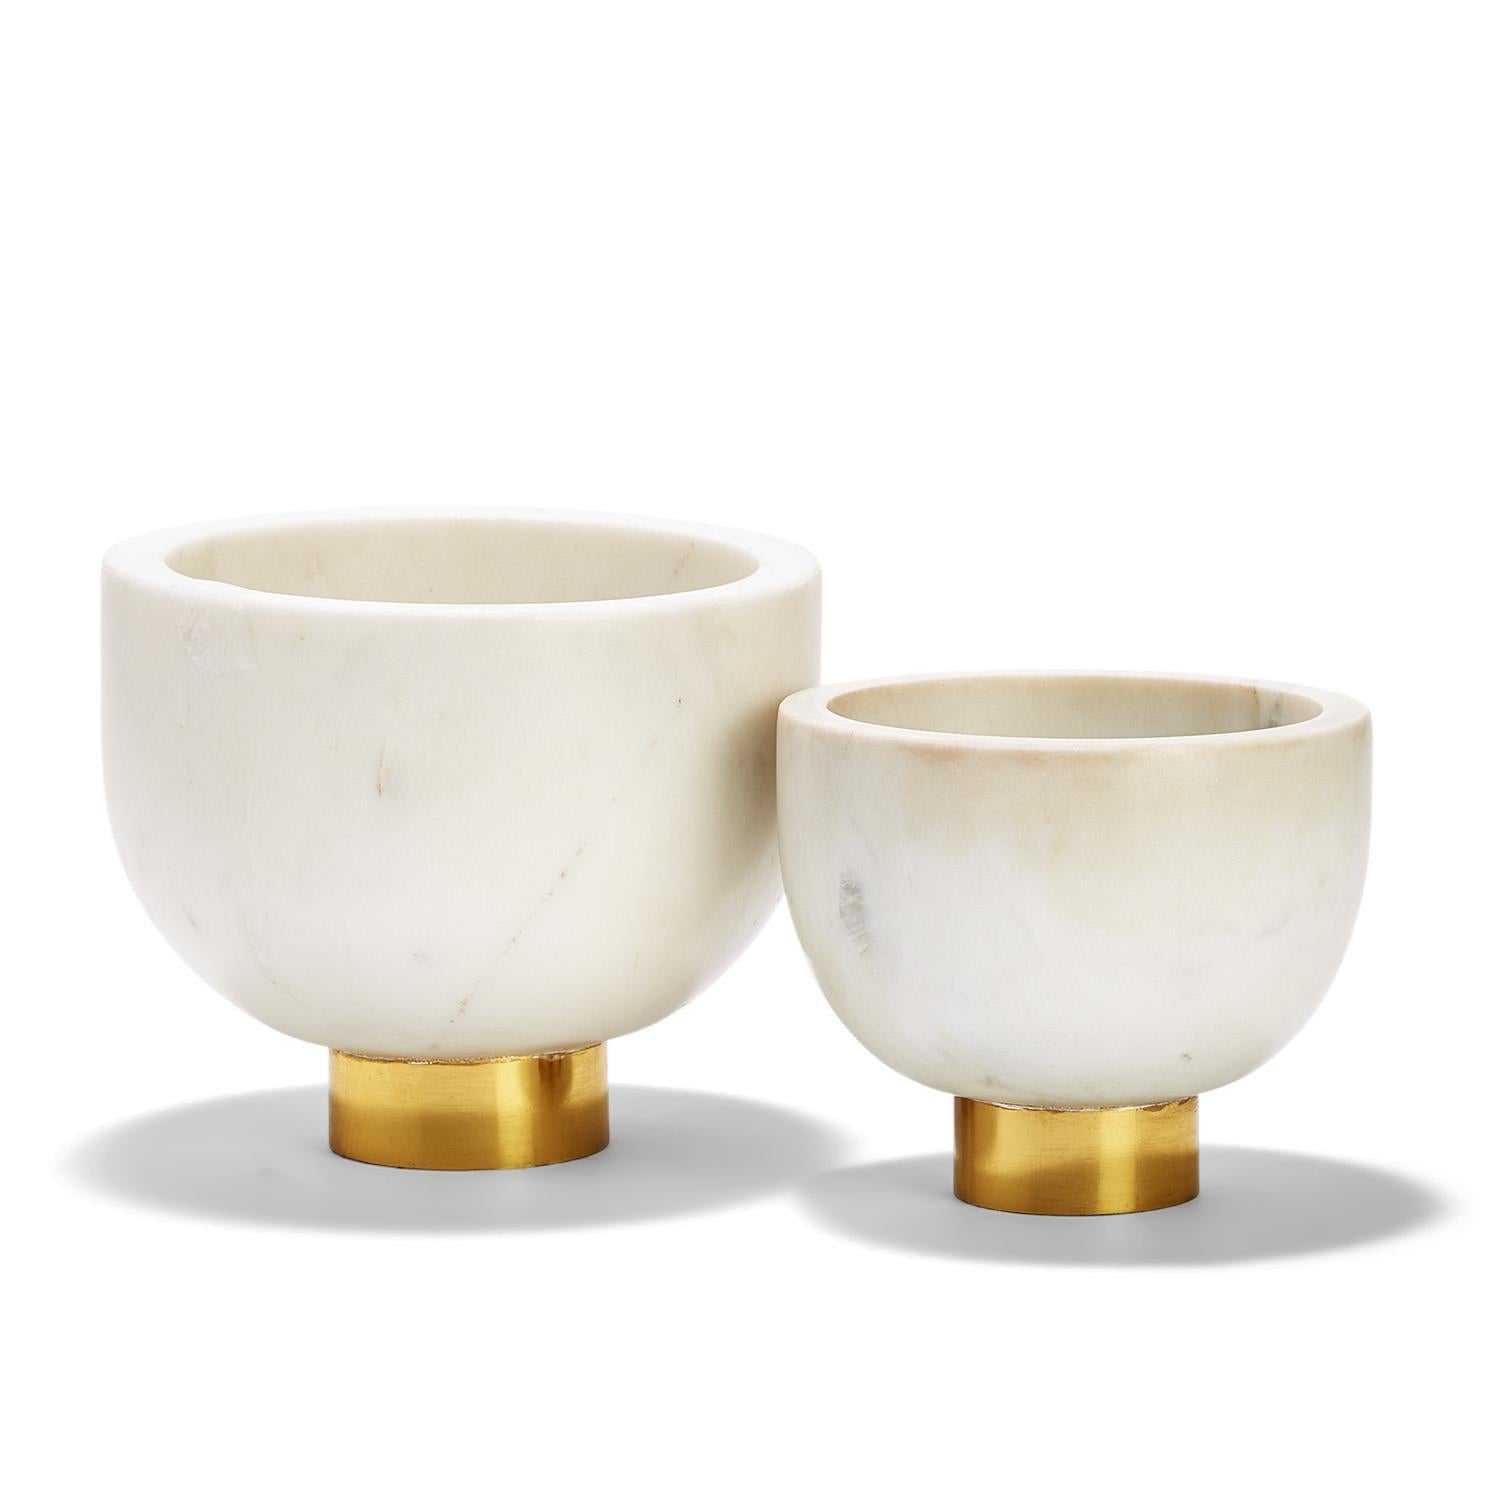 WHITE MARBLE BOWLS (SET OF 2)